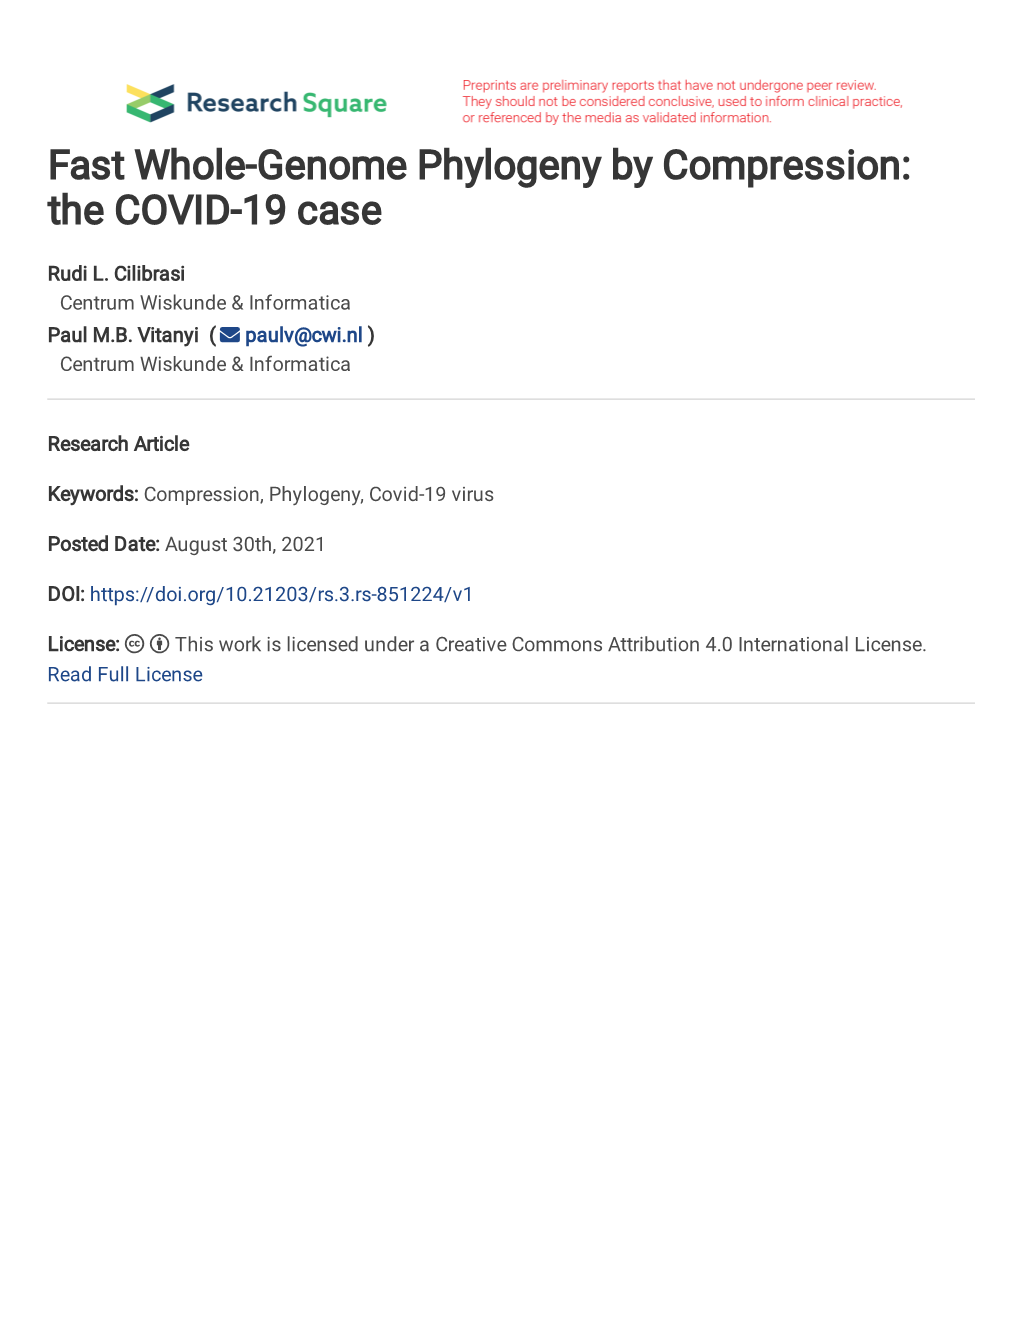 Fast Whole-Genome Phylogeny by Compression: the COVID-19 Case